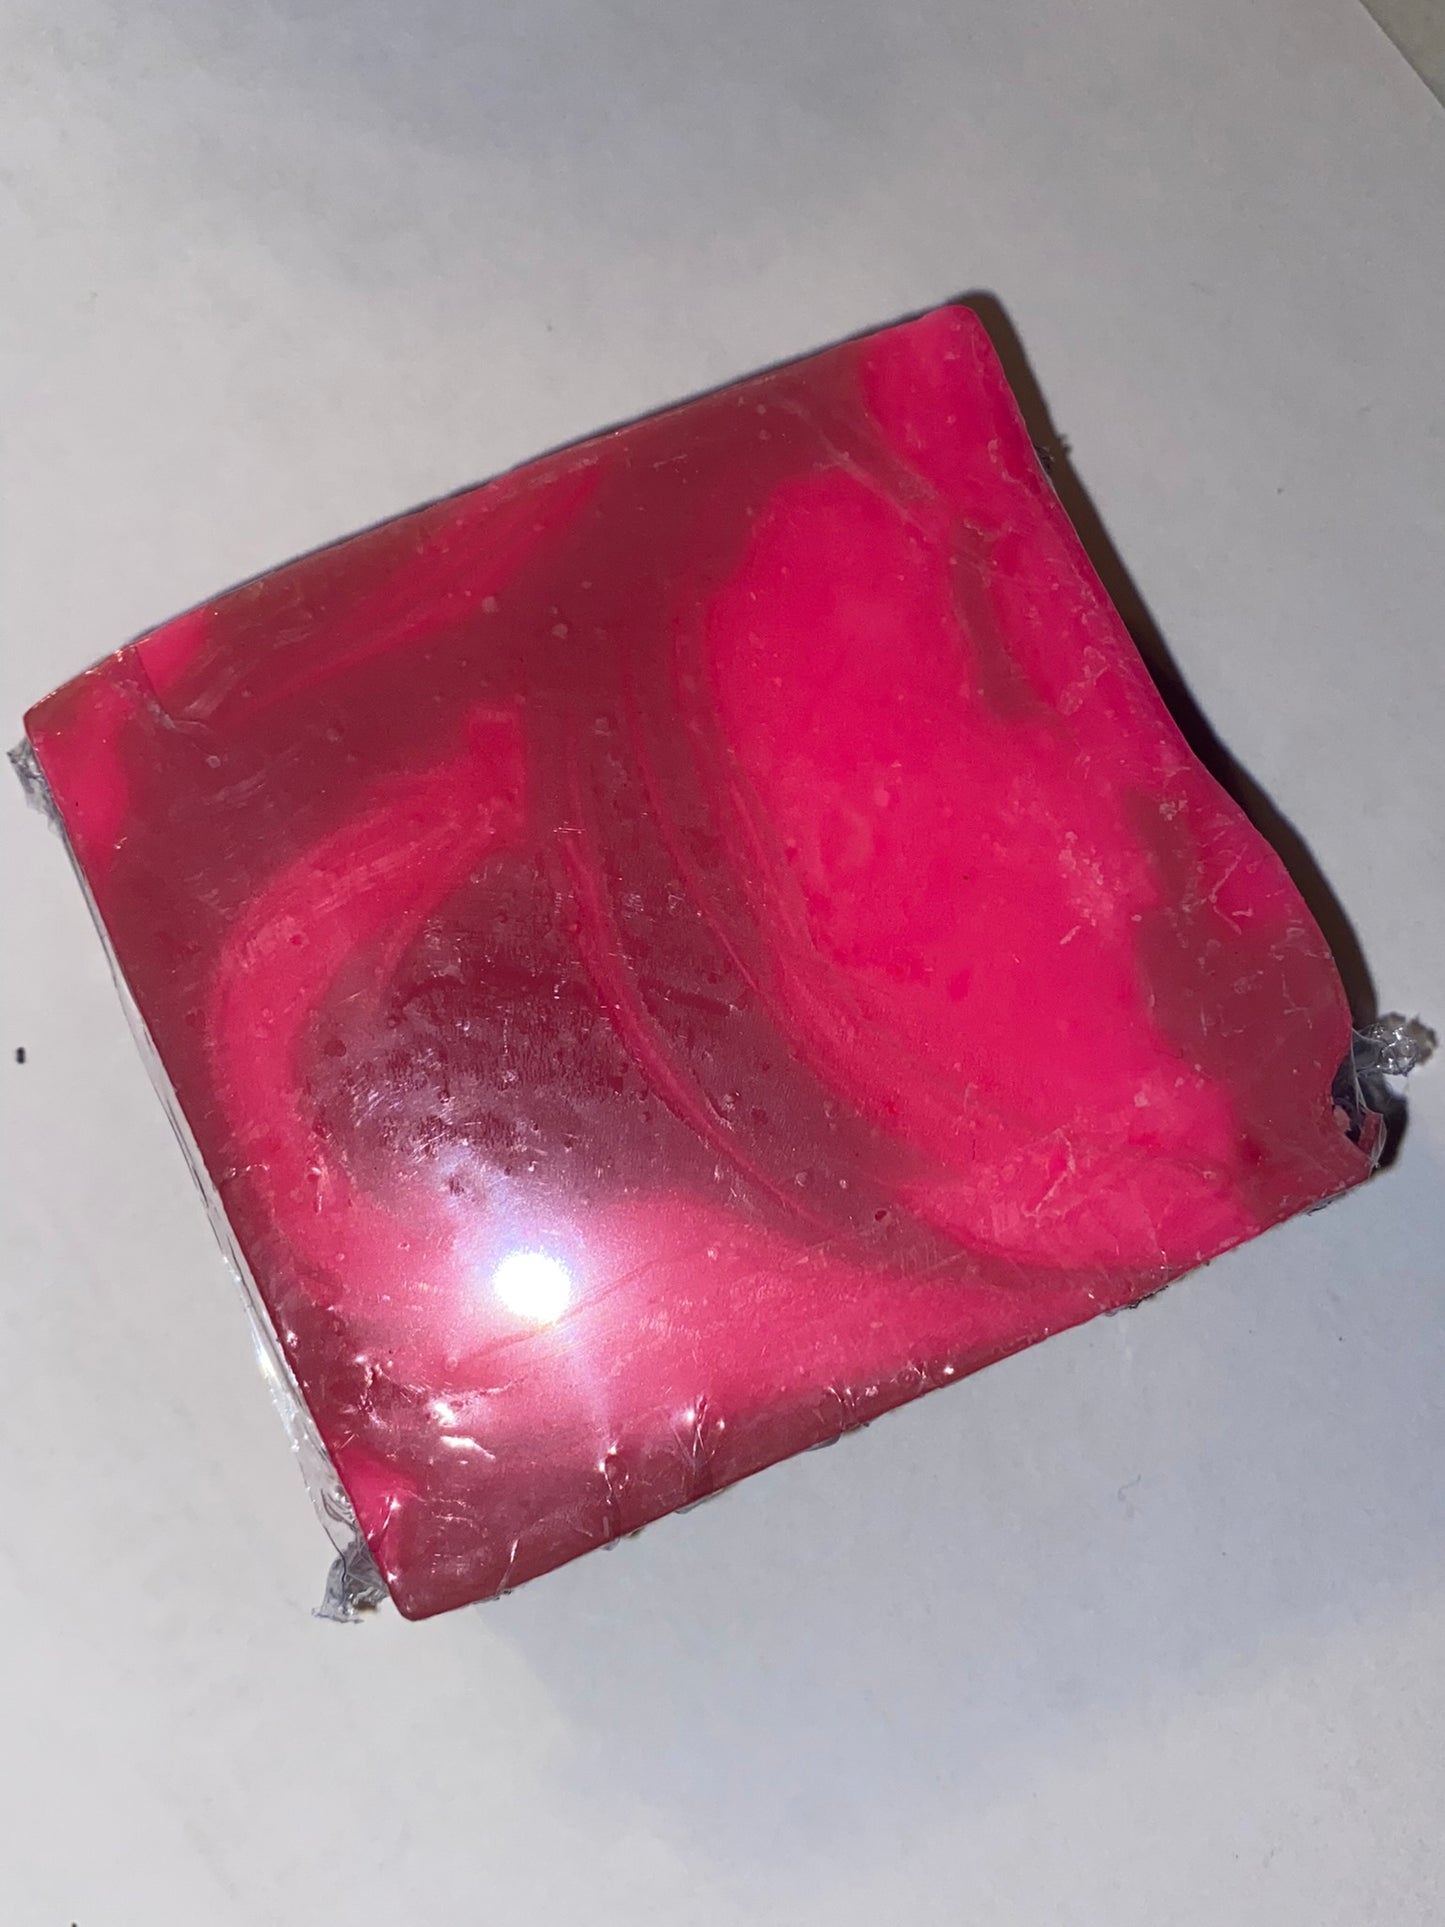 Two toned pink soap 